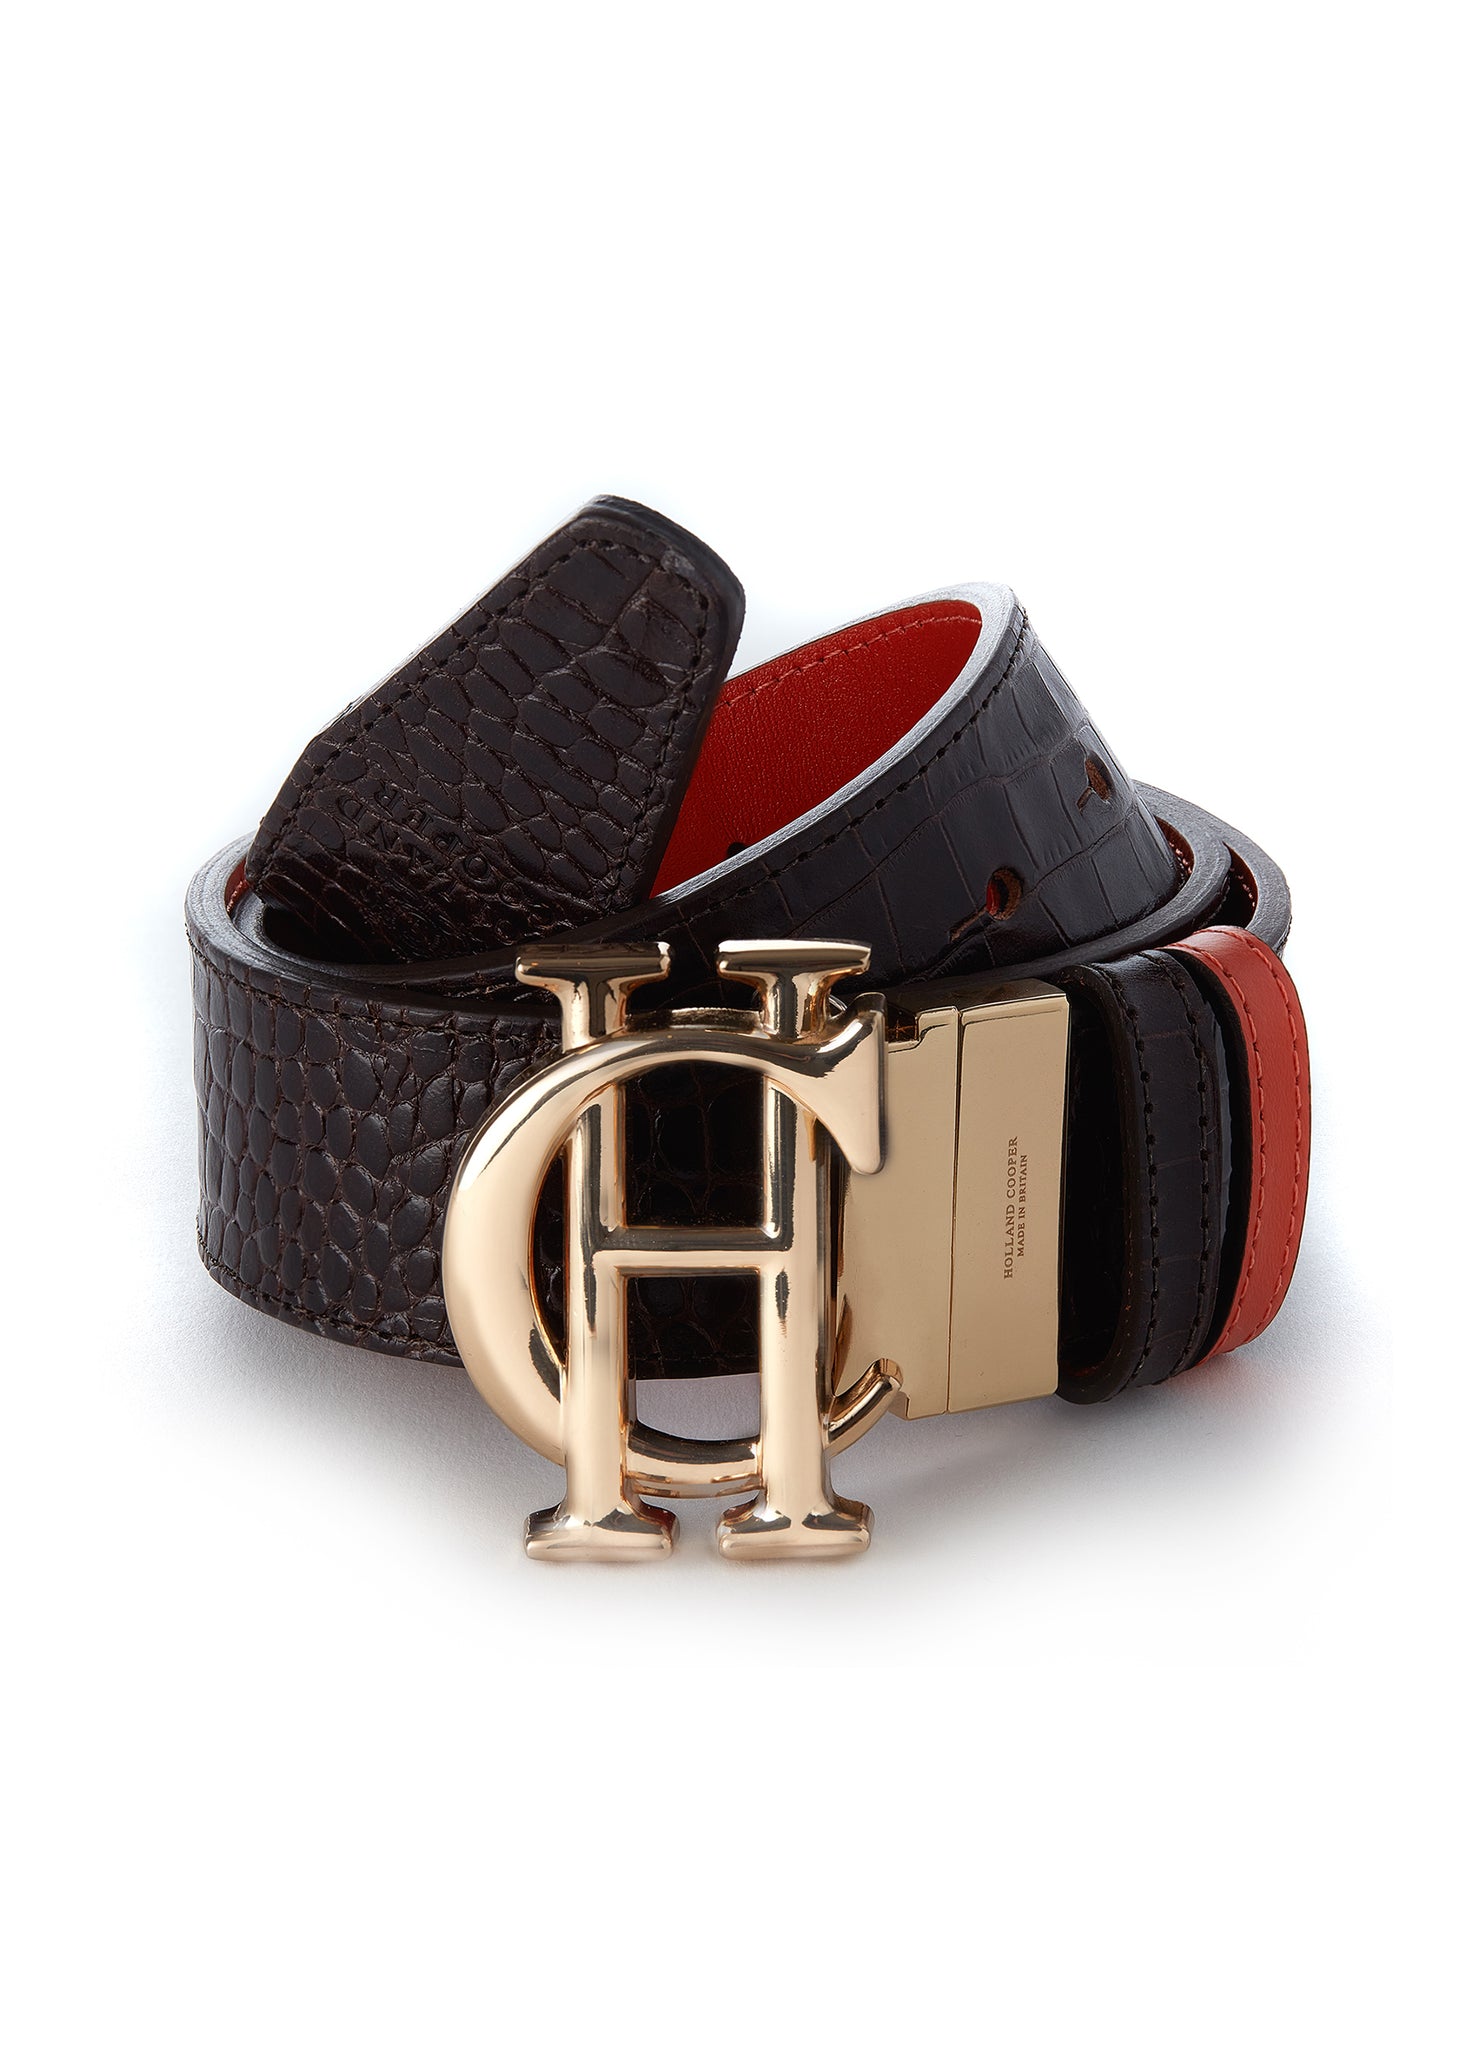 genuine leather reversible belt with orange on one side and chocolate croc on the other featuring large gold hc belt fastening and 2 belt loops in both colours